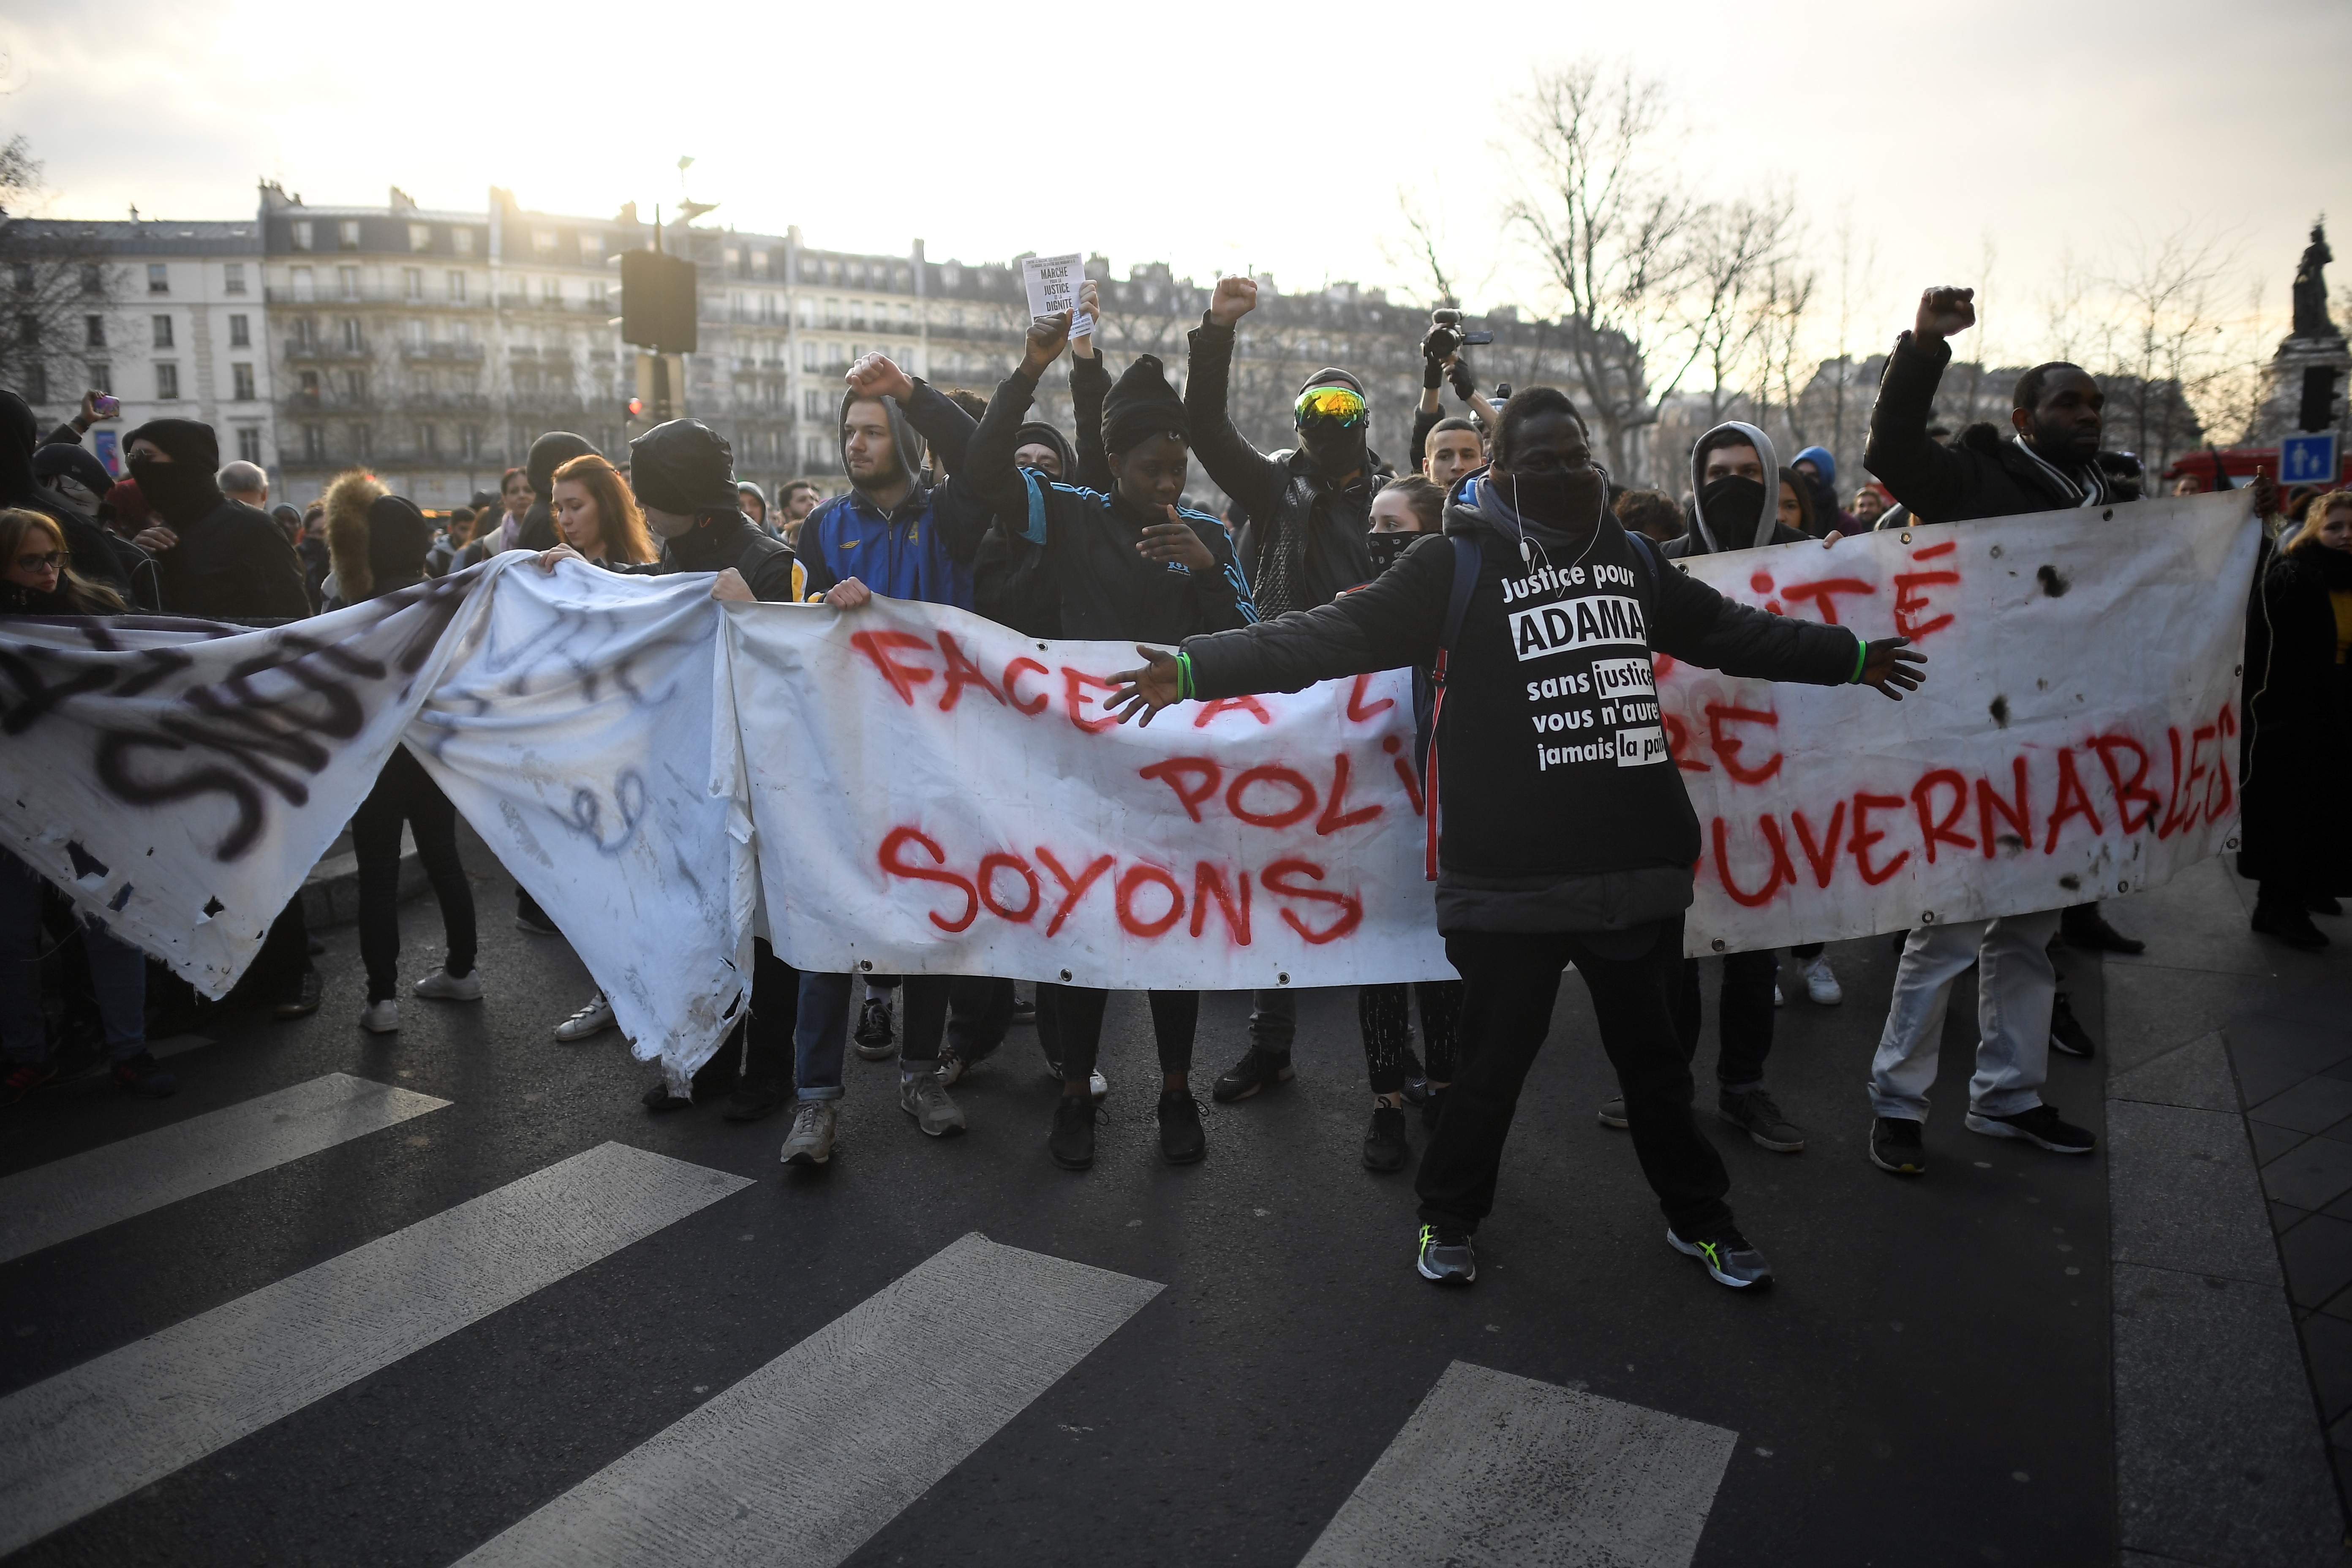 A protester wearing a shirt reading "Justice for Adama" gestures near a banner reading "In front of police impunity, let us be ungovernable" during a demonstration against police brutality on February 18, 2017 on the place de la Republique in Paris, following the alleged rape of a black youth, identified only as Theo, with a police baton, an incident that has sparked 10 nights of rioting and more than 200 arrests. The injuries sustained by Theo during a stop-and-search operation on February 2 in the suburb of Aulnay-sous-Bois, has revived long-simmering frustrations over policing in immigrant communities, where young men accuse the police of repeatedly targeting them in aggressive stop-and-search operations and using excessive force during arrests.  / AFP PHOTO / Lionel BONAVENTURE